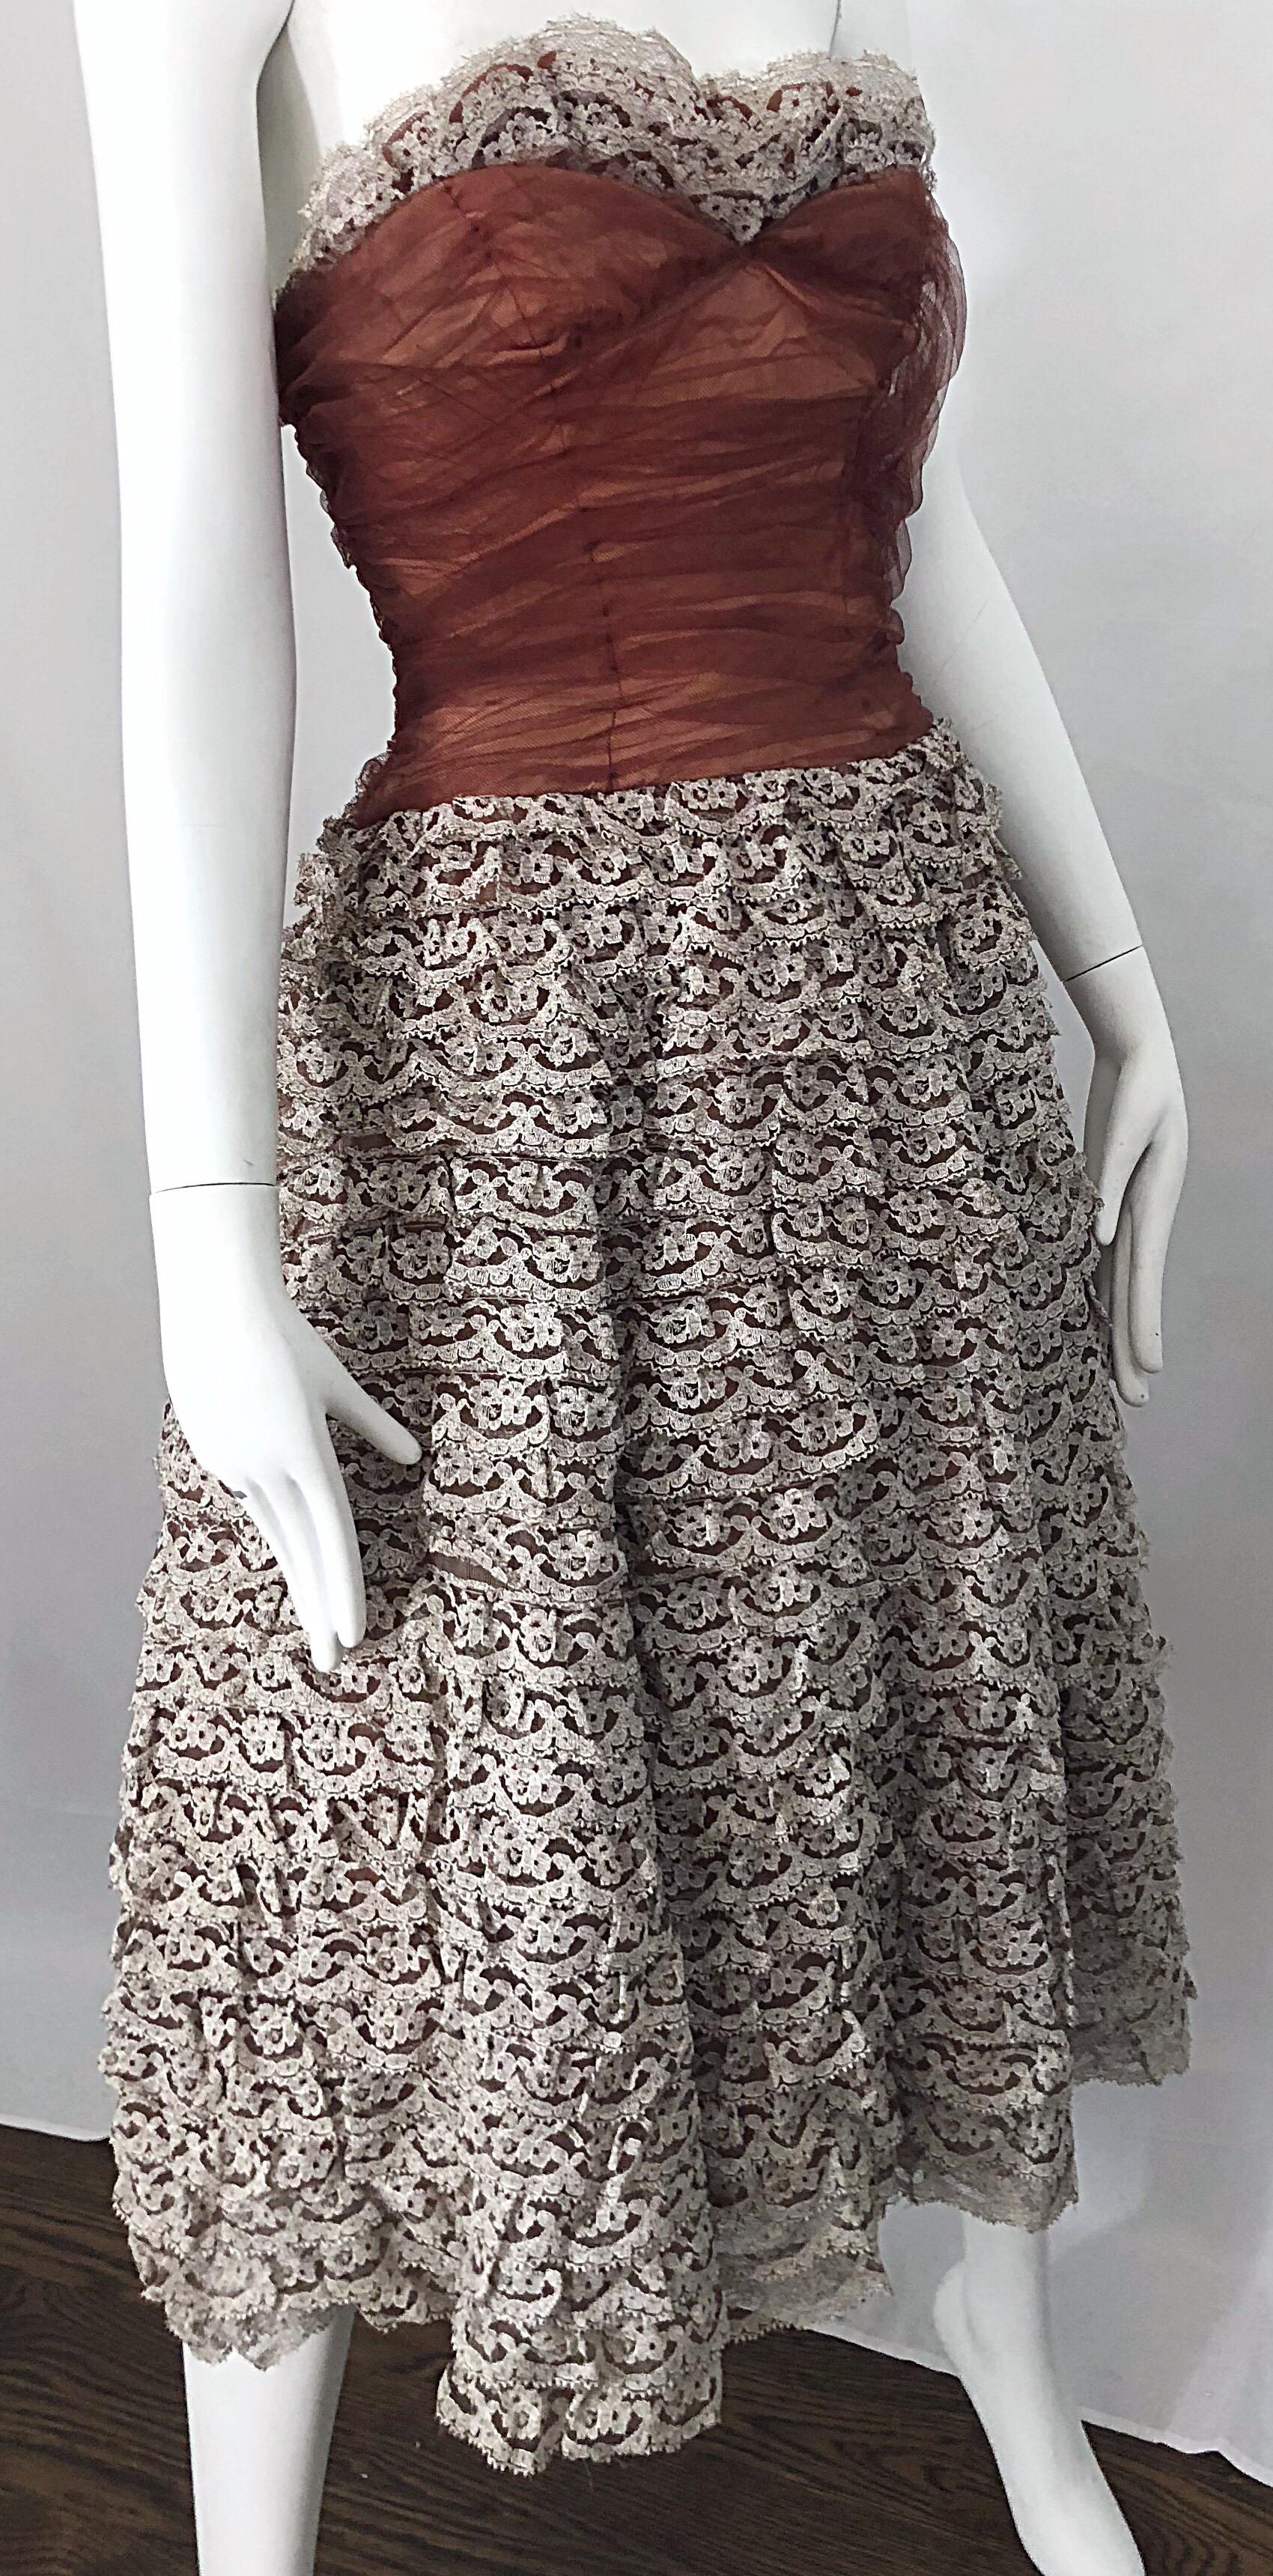 Stunning 1950s Demi Couture Taupe + Terra Cotta Vintage 50s Strapless Lace Dress For Sale 4